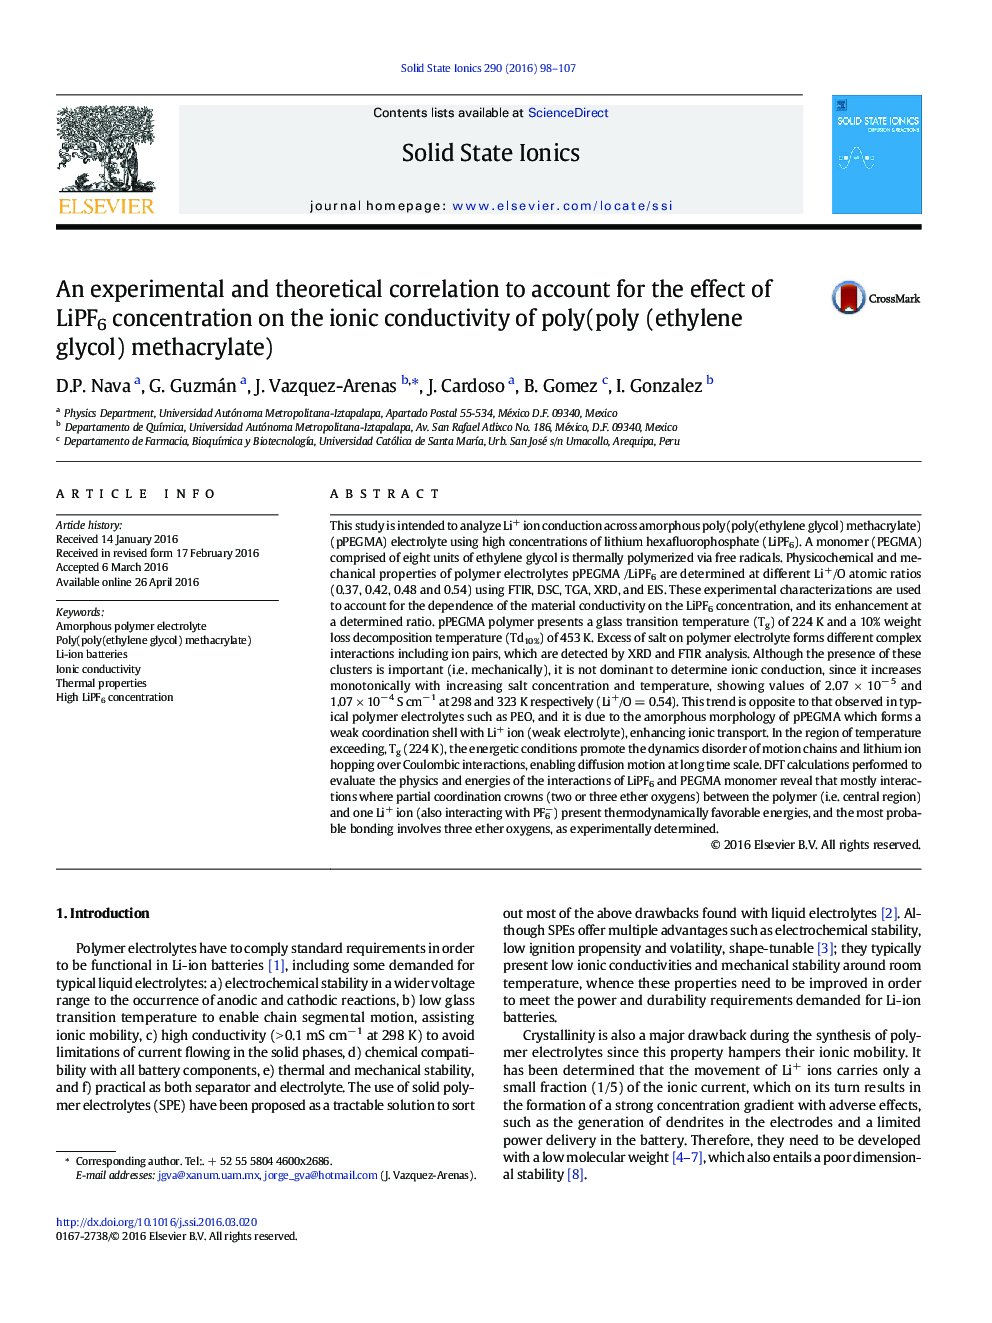 An experimental and theoretical correlation to account for the effect of LiPF6 concentration on the ionic conductivity of poly(poly (ethylene glycol) methacrylate)